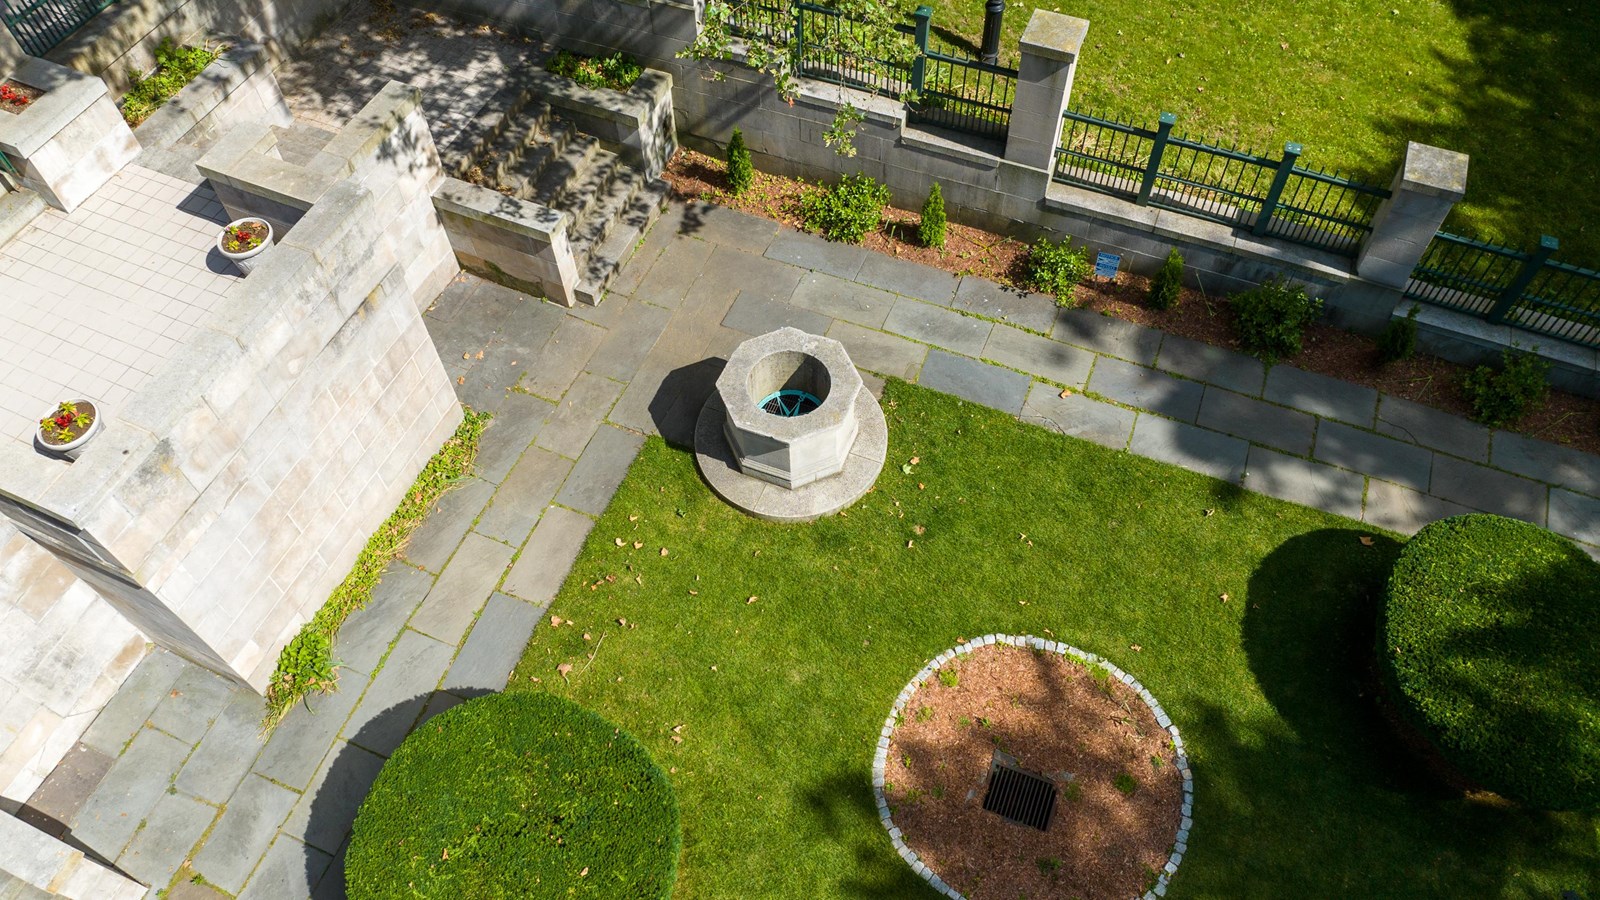 The Hahn memorial is a formal classical garden space with a well and stone walkways